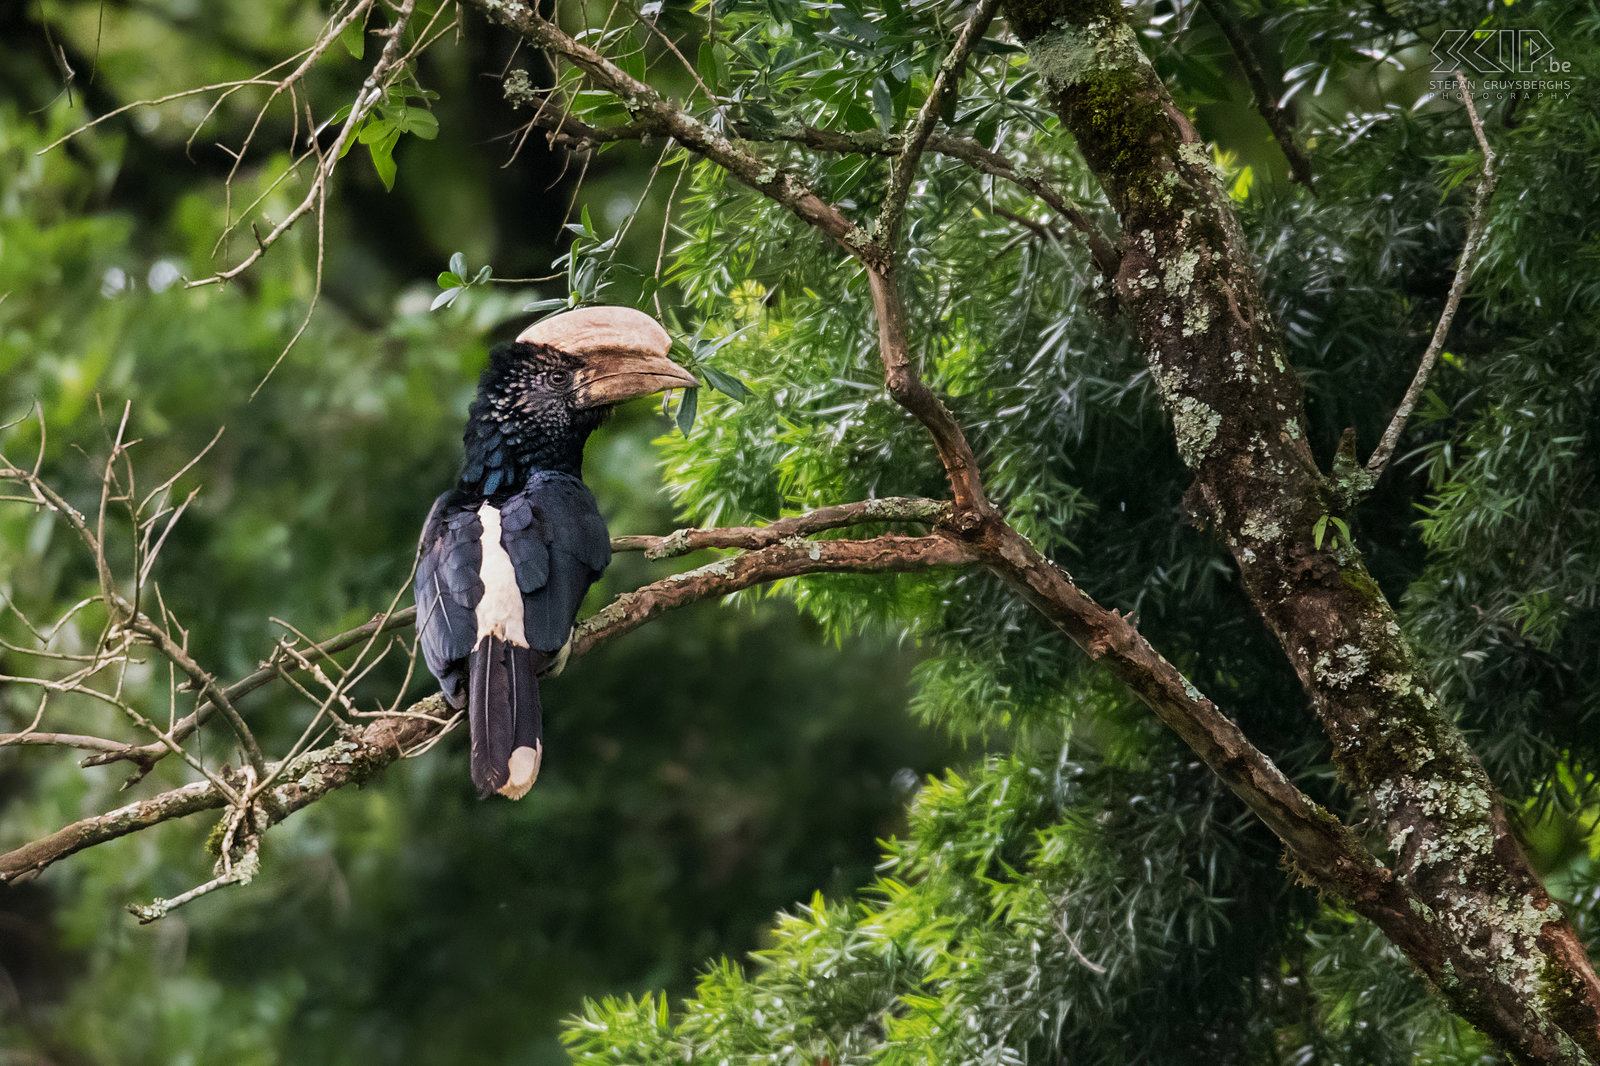 Bale Mountains - Harenna - Silvery cheecked hornbill The Silvery cheecked hornbill (Bycanistes brevis) is 75-80 cm long with a remarkably large beak and 'horn' on the upper beak. They live in tropical forests such as the Harenna forest. Stefan Cruysberghs